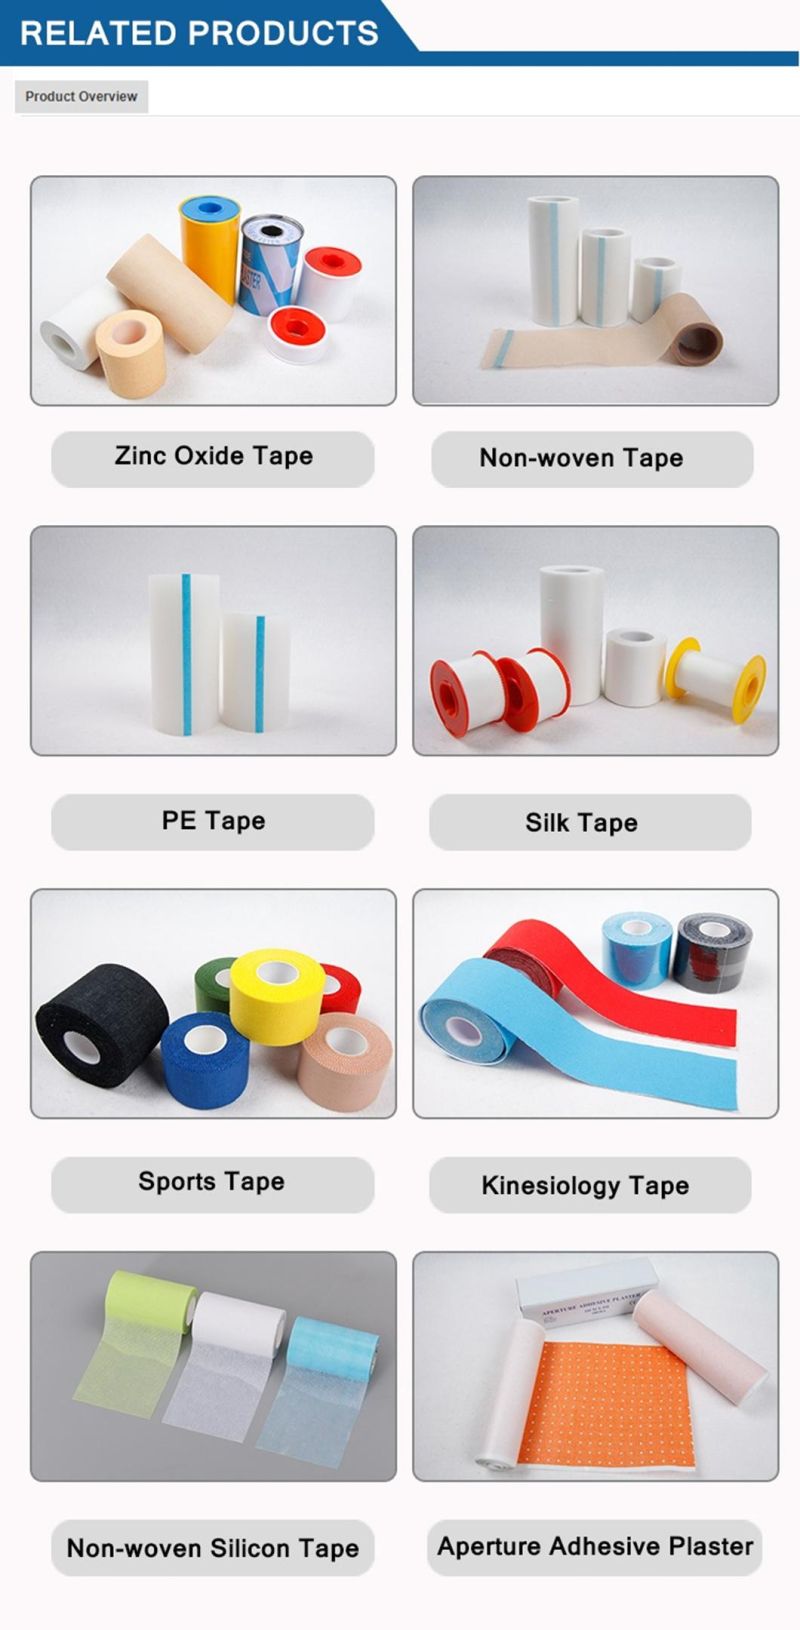 China Factory Directly Supply Medical Tape (Non-woven/Paper Tape)